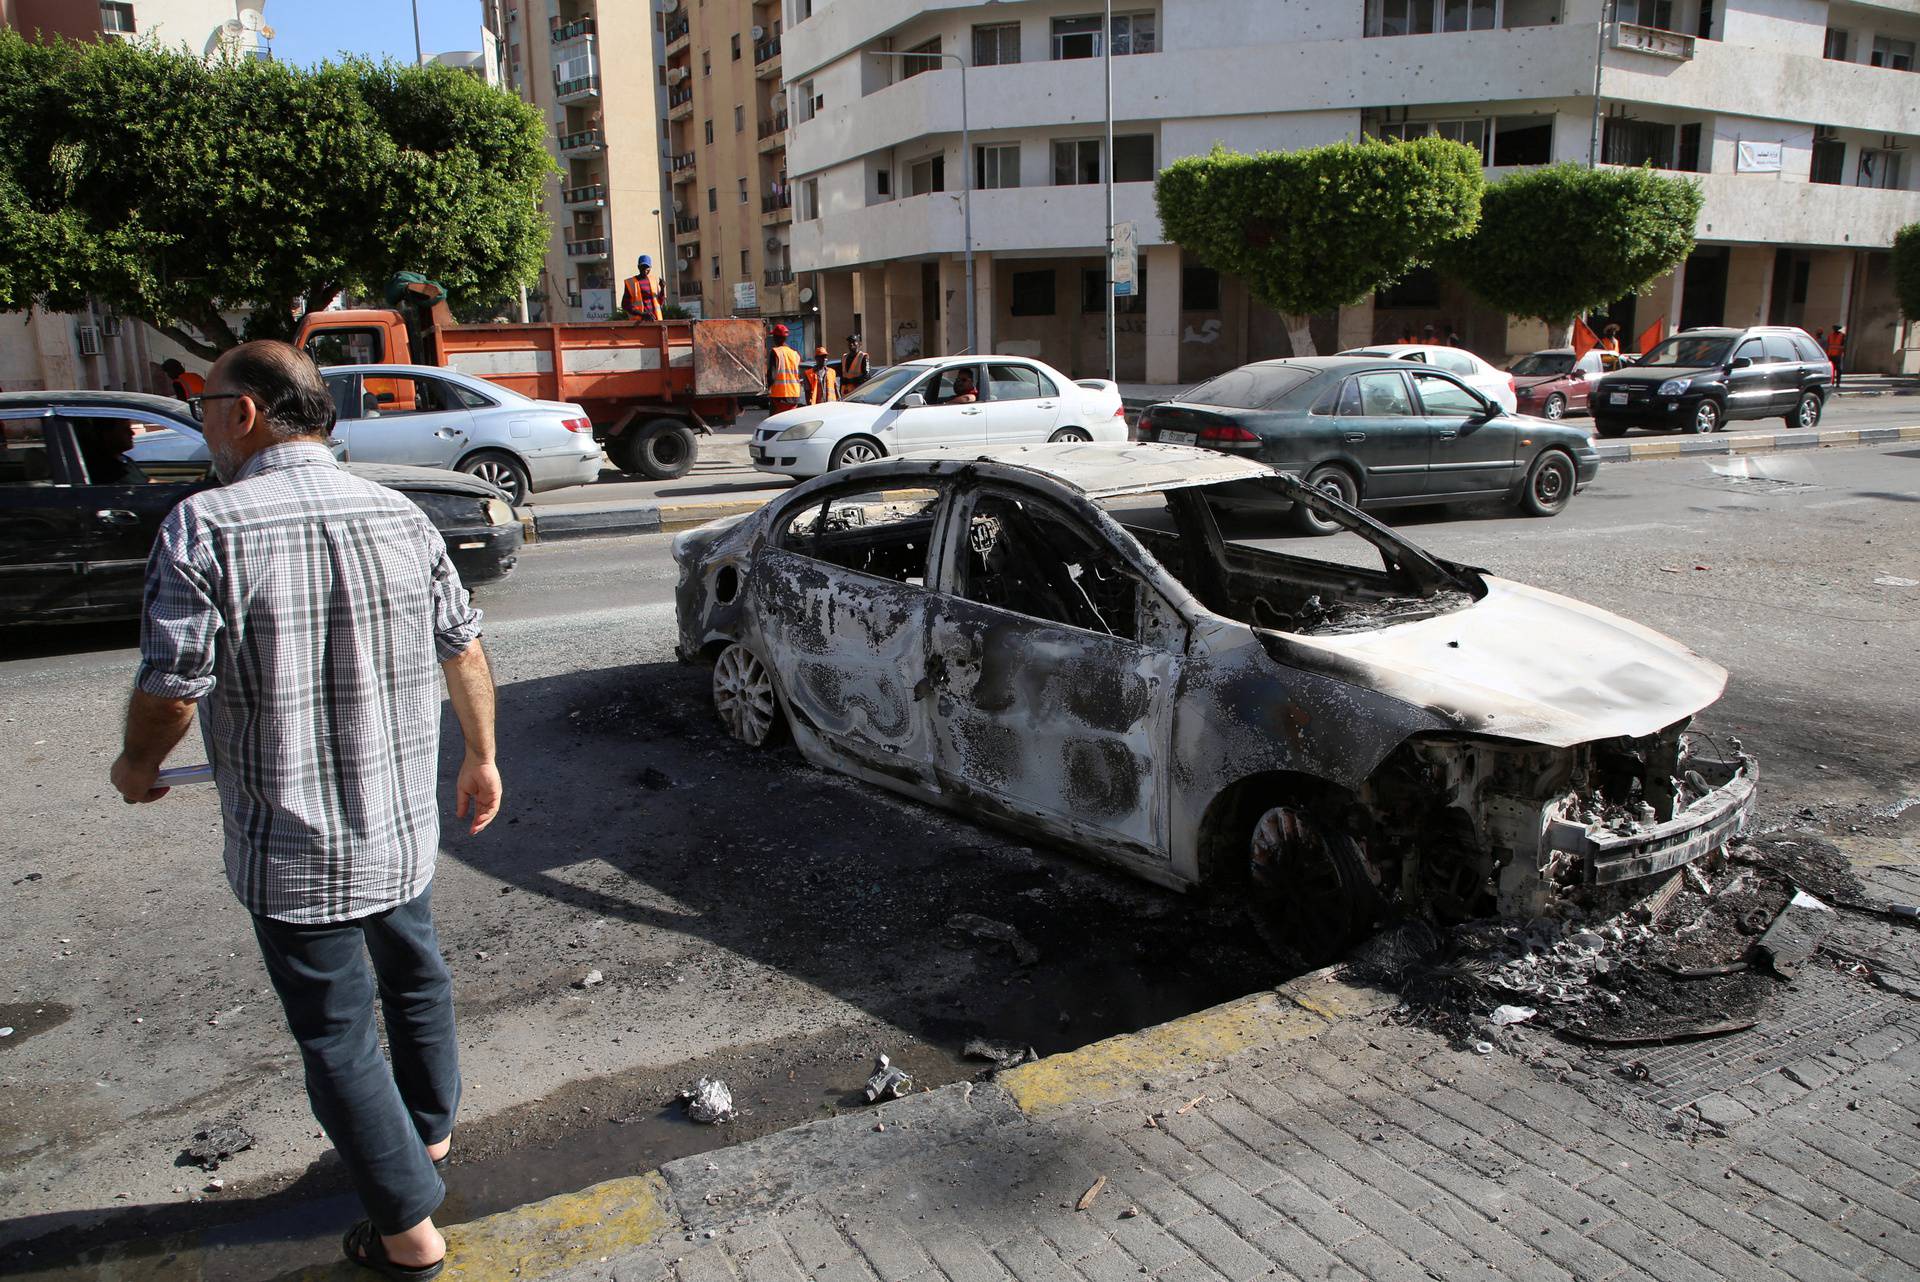 A man walks next to a burned car after yesterday's clashes in Tripoli